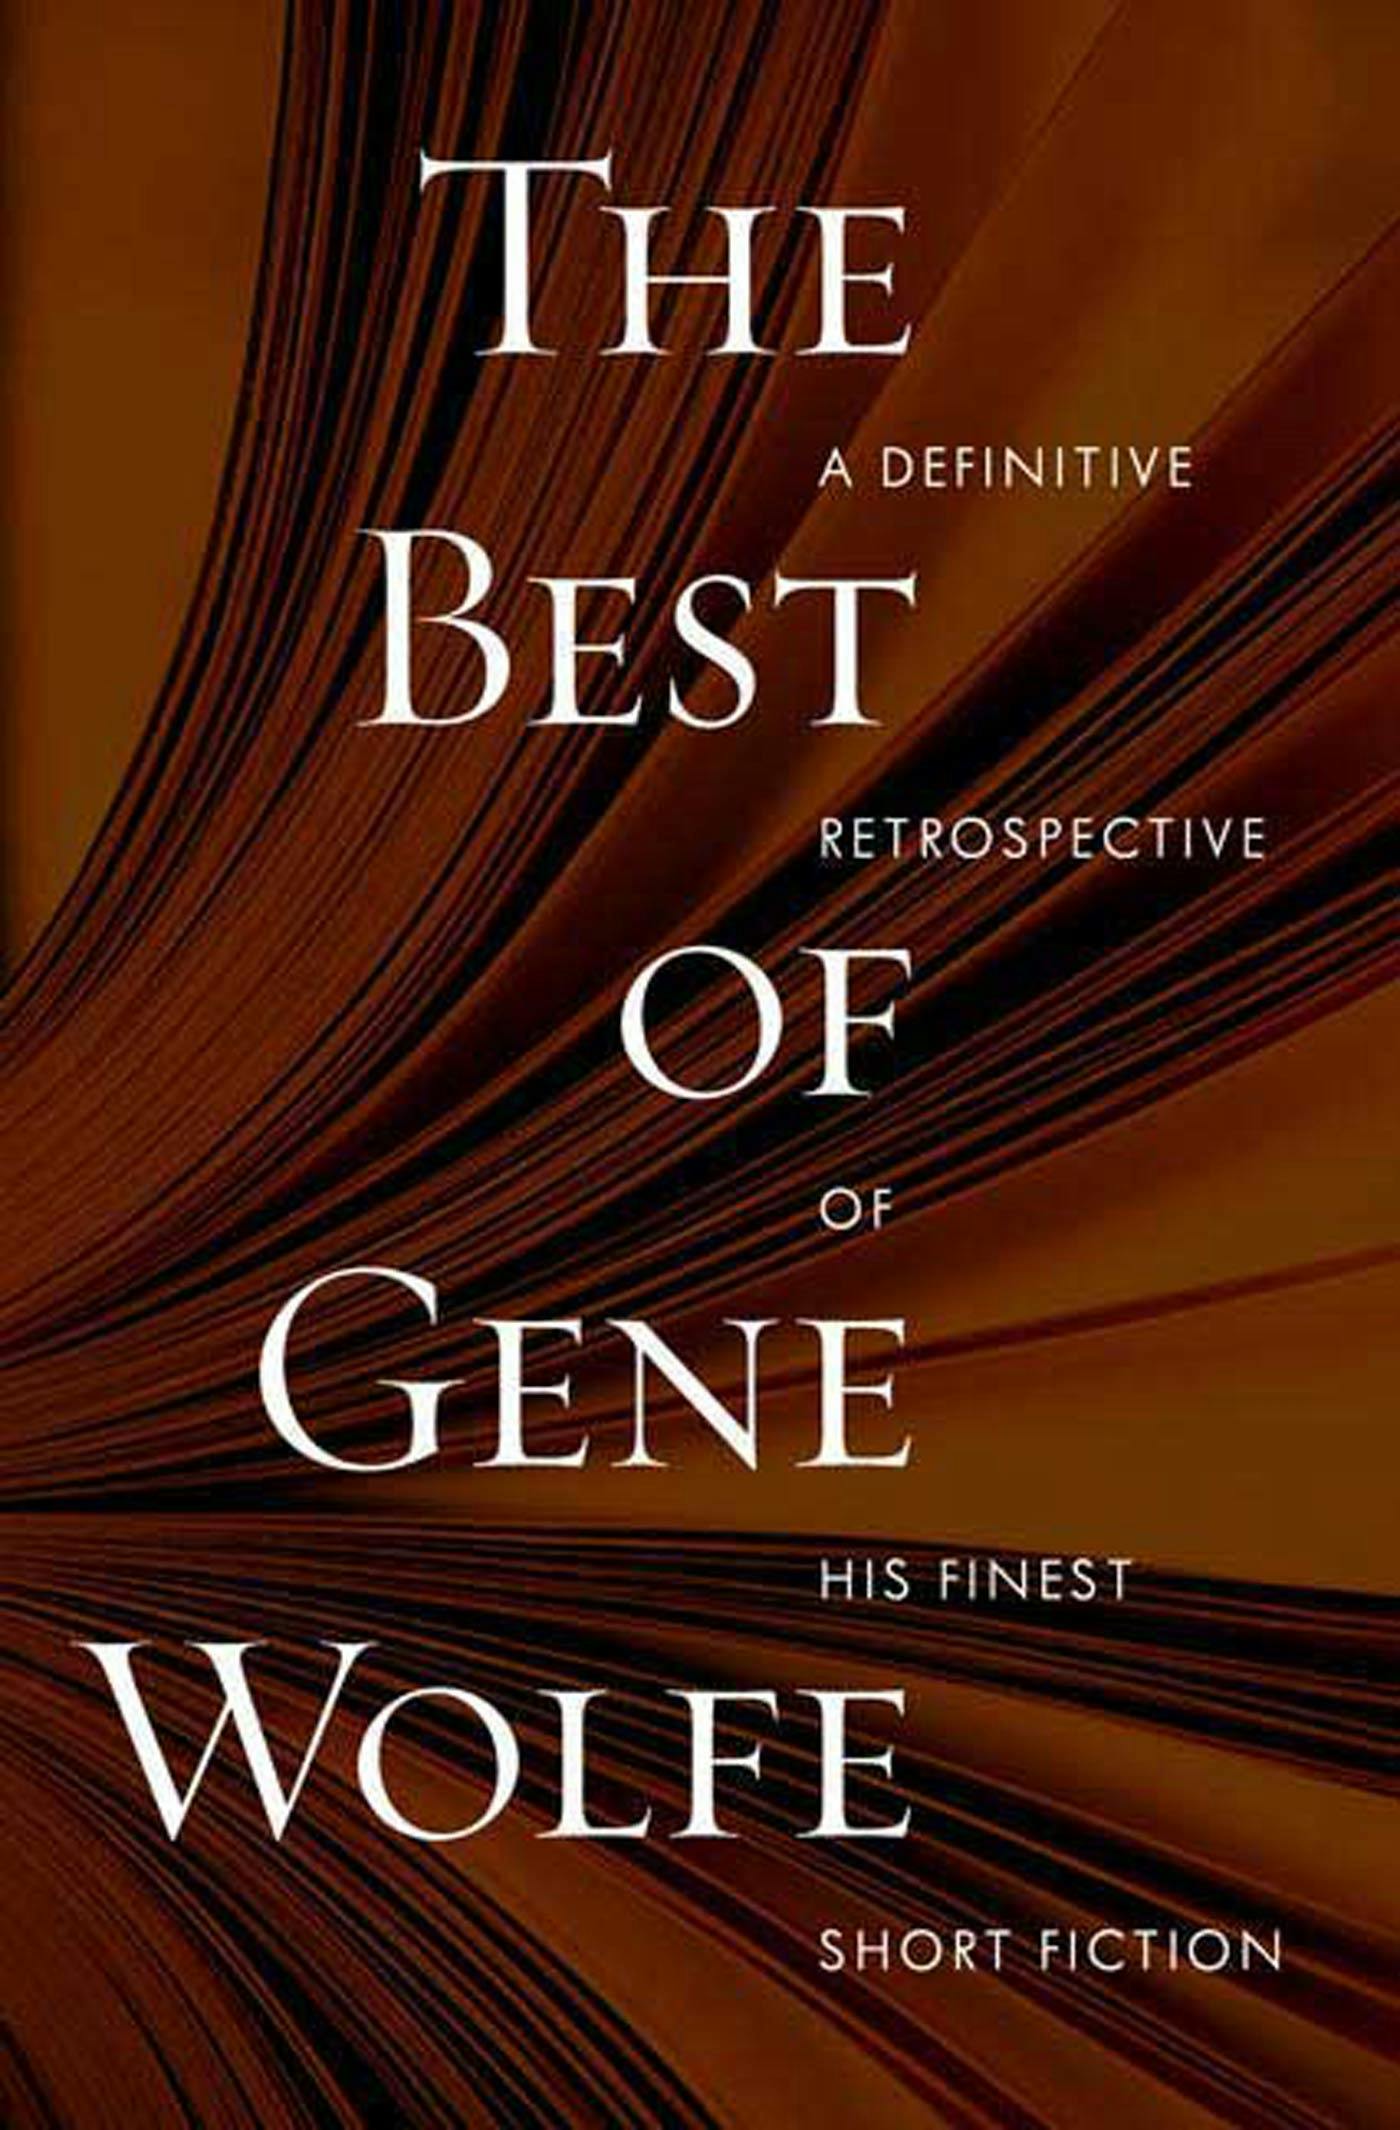 Cover for the book titled as: The Best of Gene Wolfe